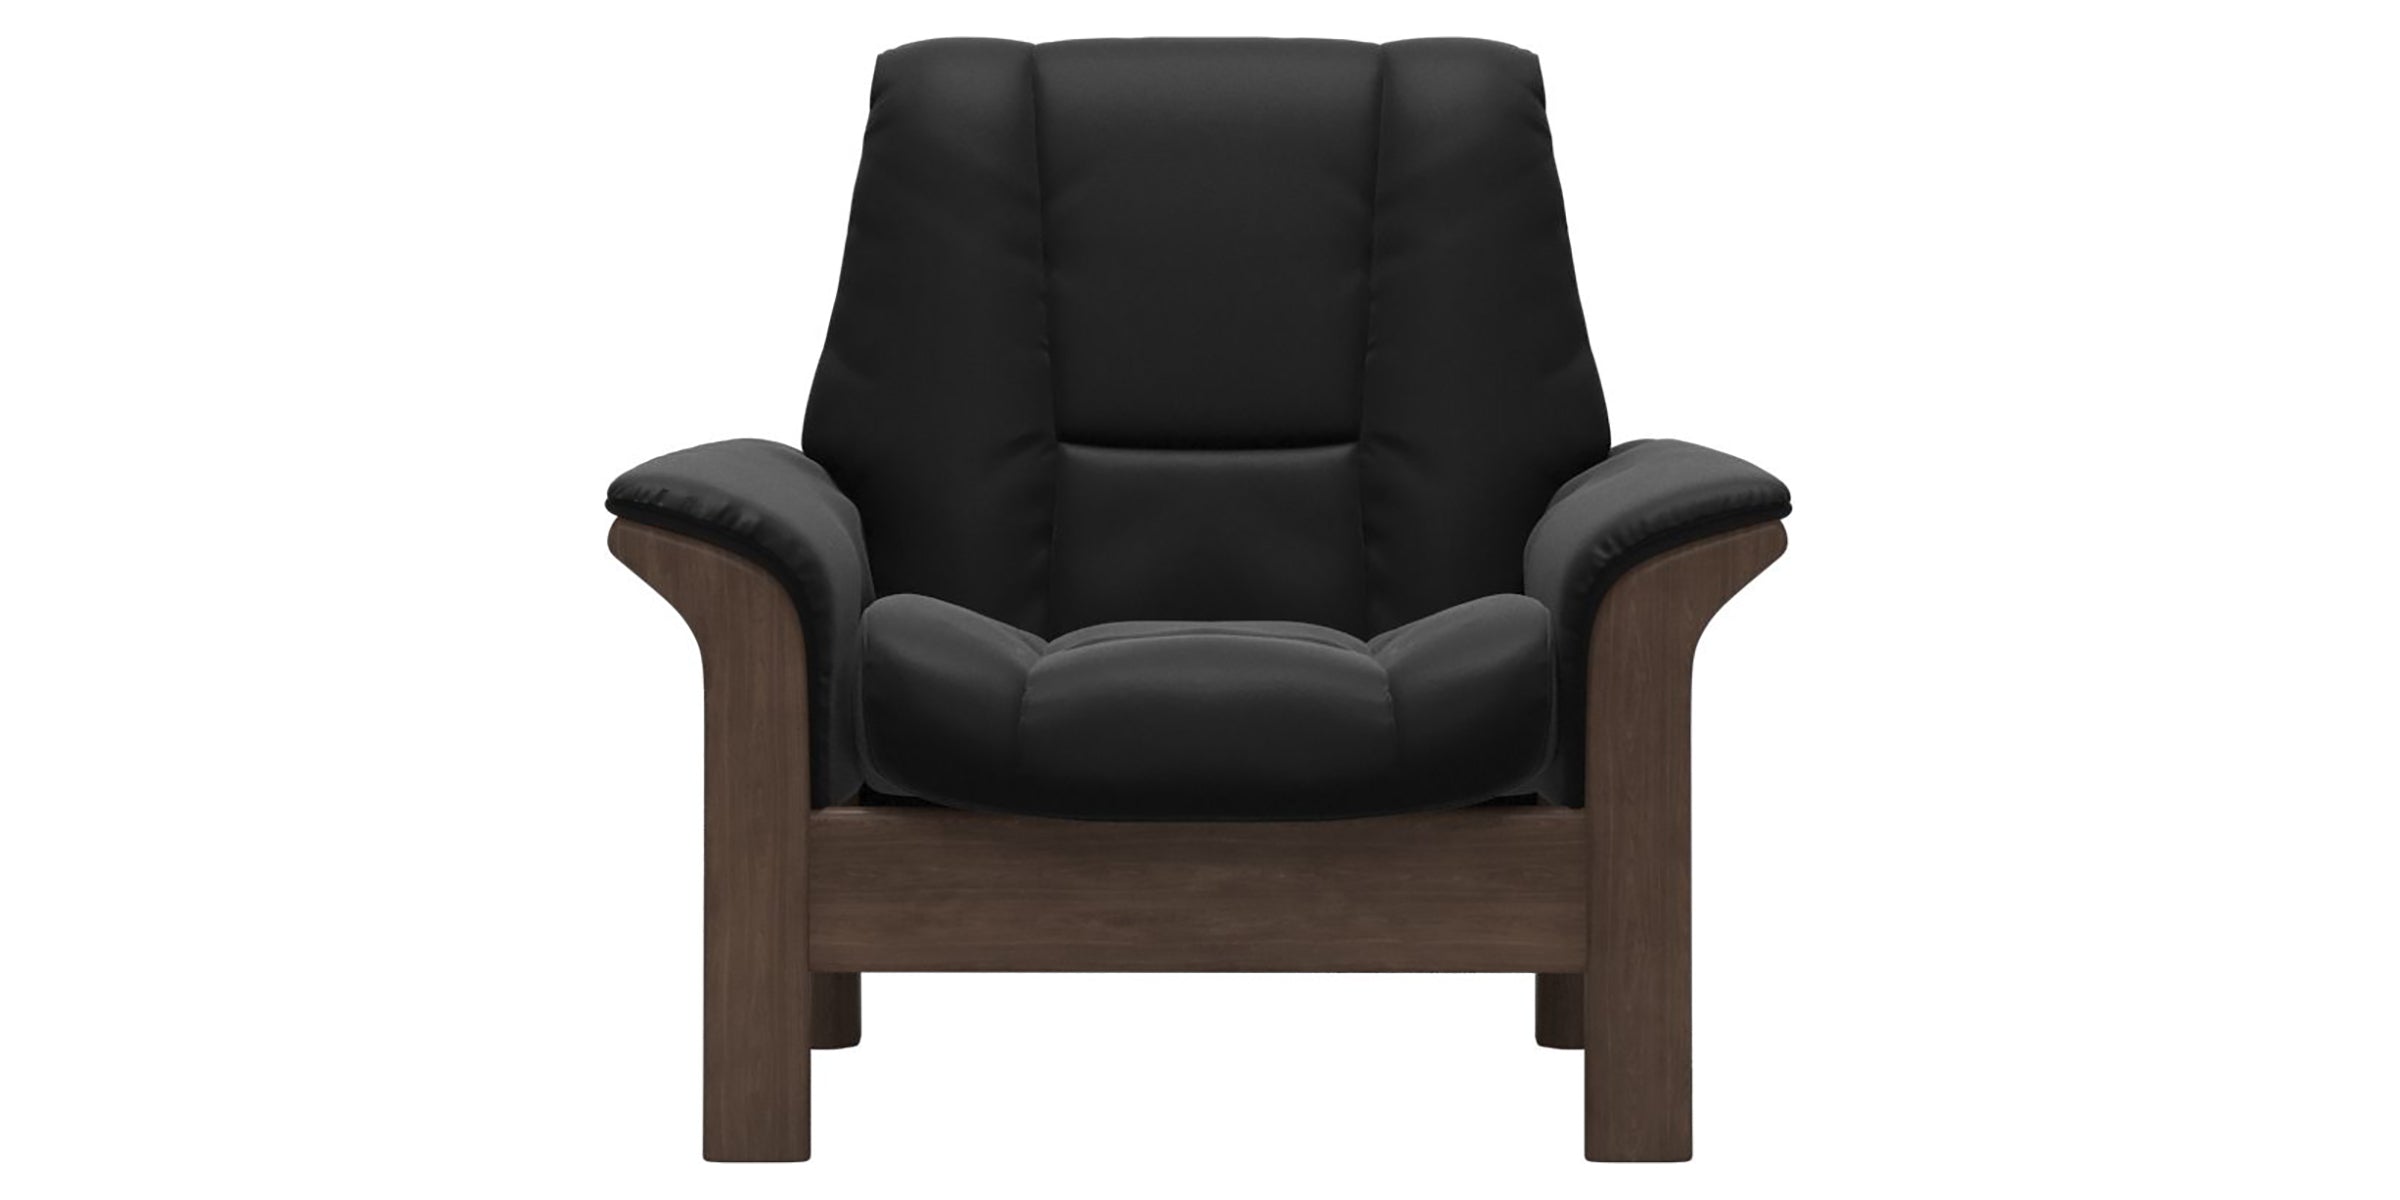 Paloma Leather Black and Walnut Base | Stressless Windsor Low Back Chair | Valley Ridge Furniture